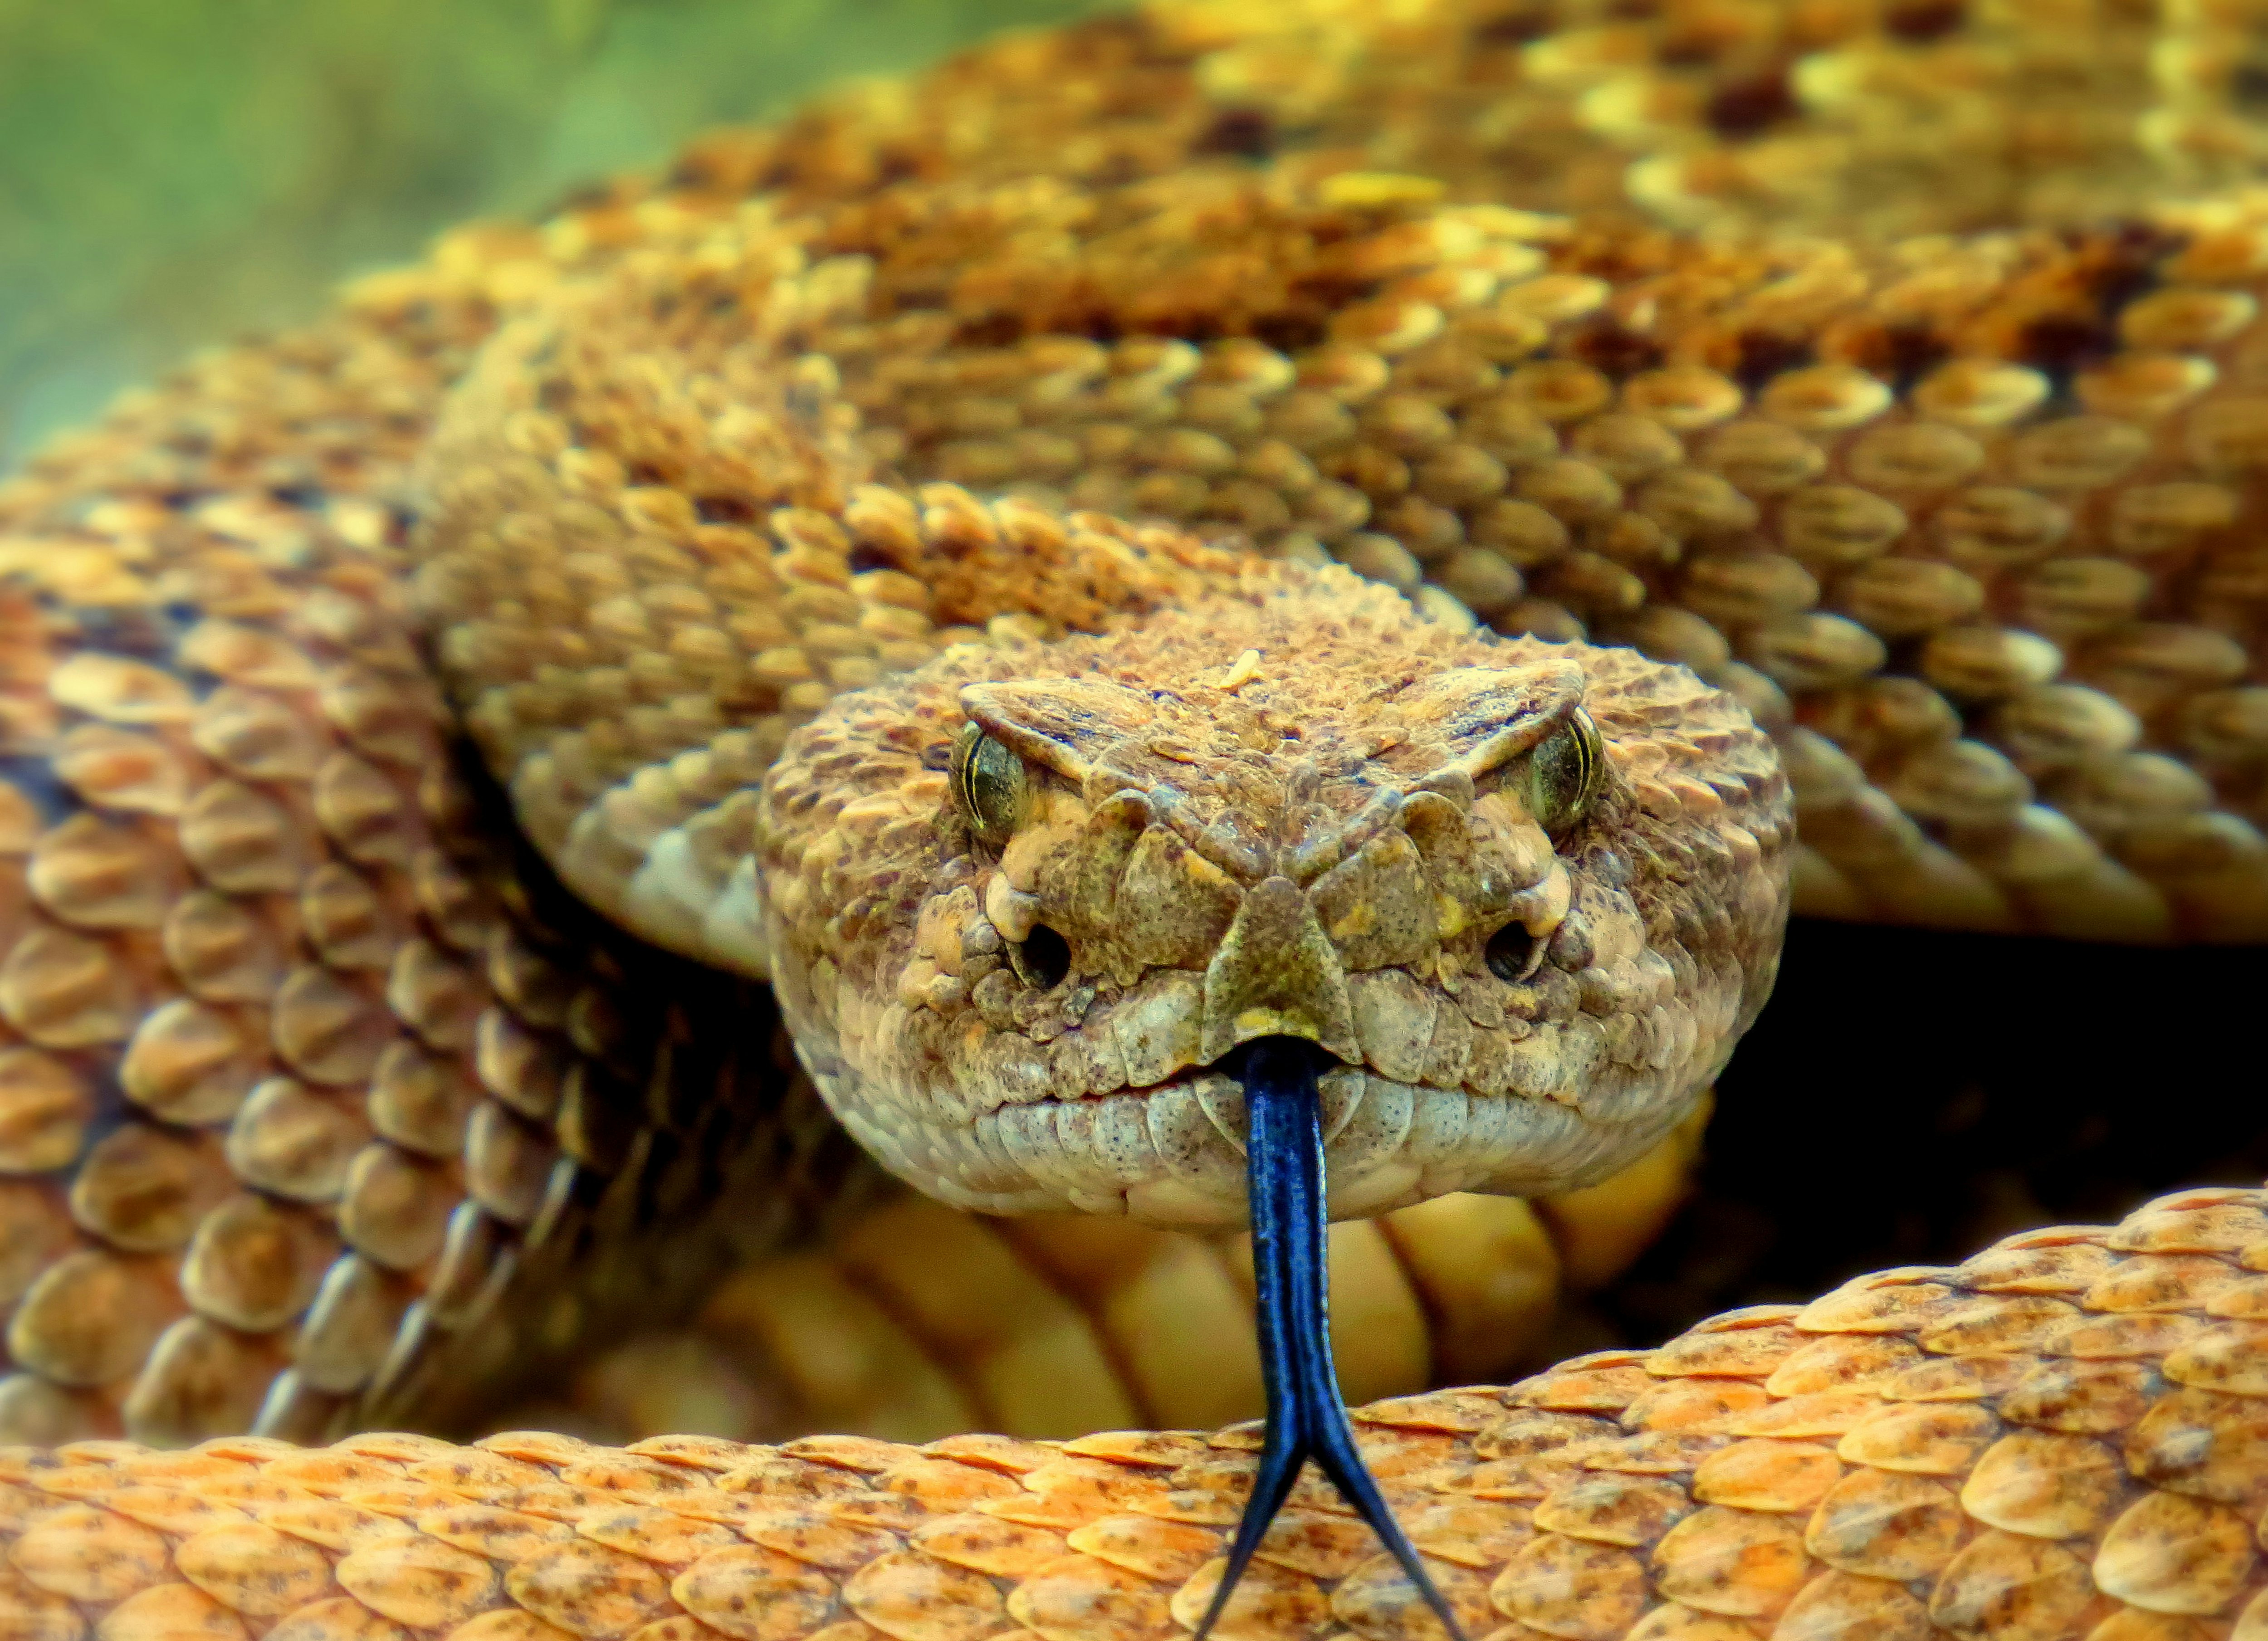 How do you know if a snake doesn't have venom?